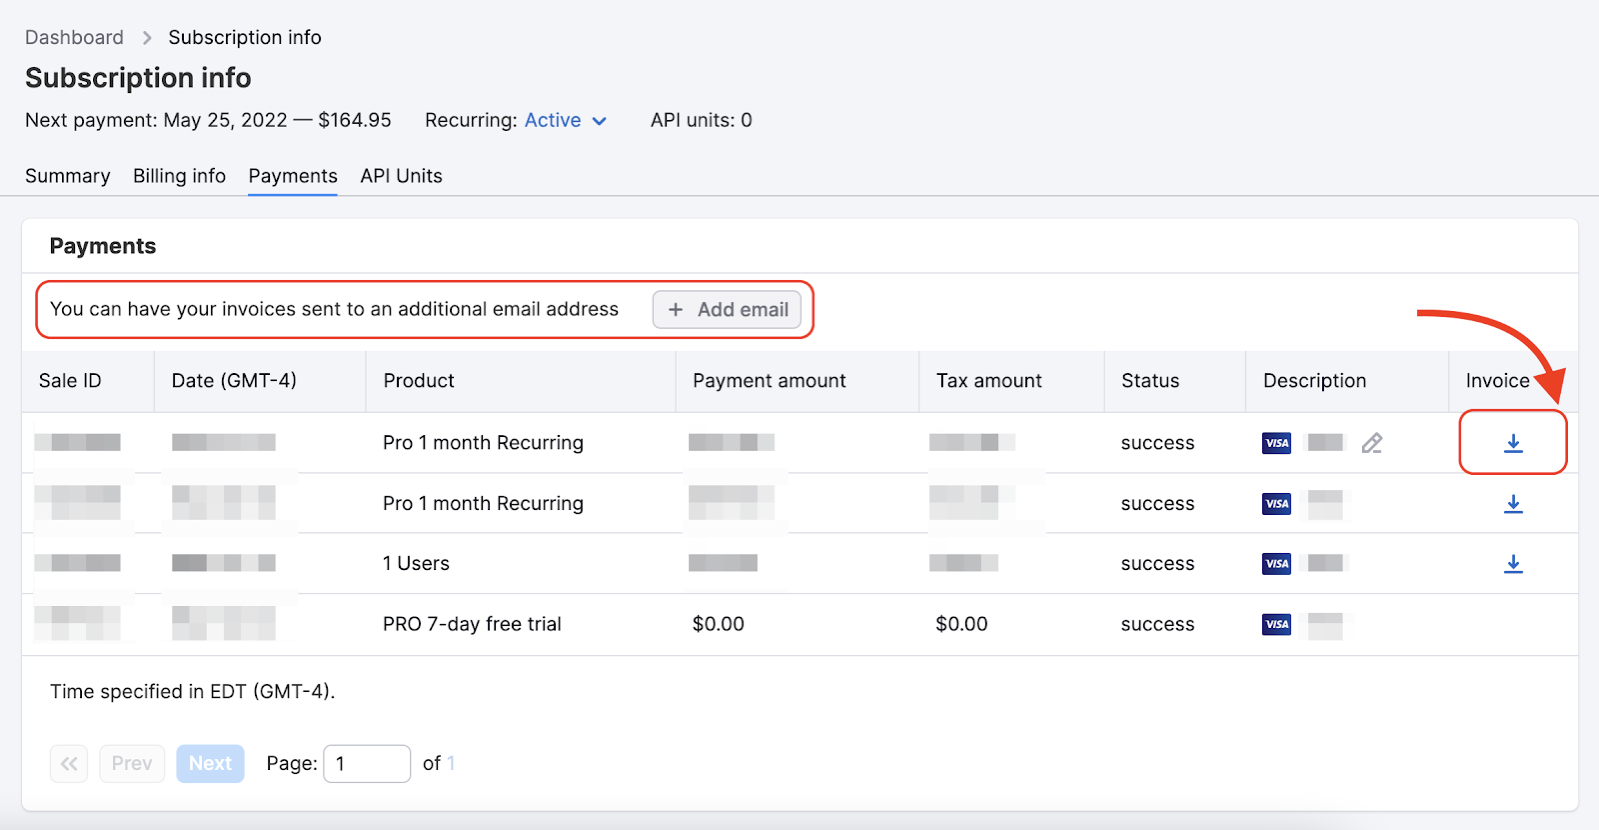 In this screenshot from Payments, a red rectangle is highlighting the area where you can add an additional email for invoices, and a red arrow is pointing to the icon that allows to download invoices. 